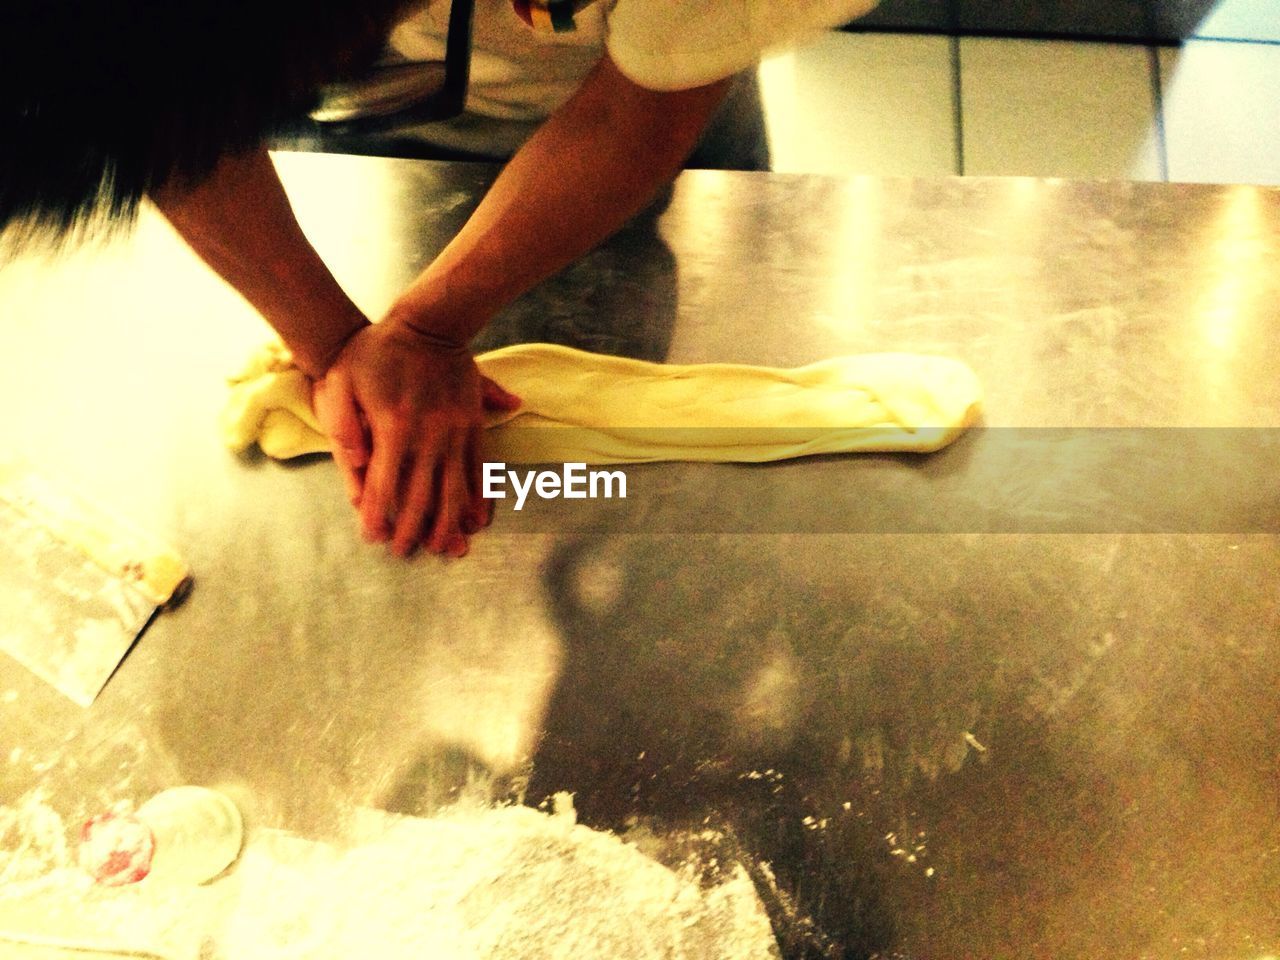 Cropped image of man kneading dough at kitchen